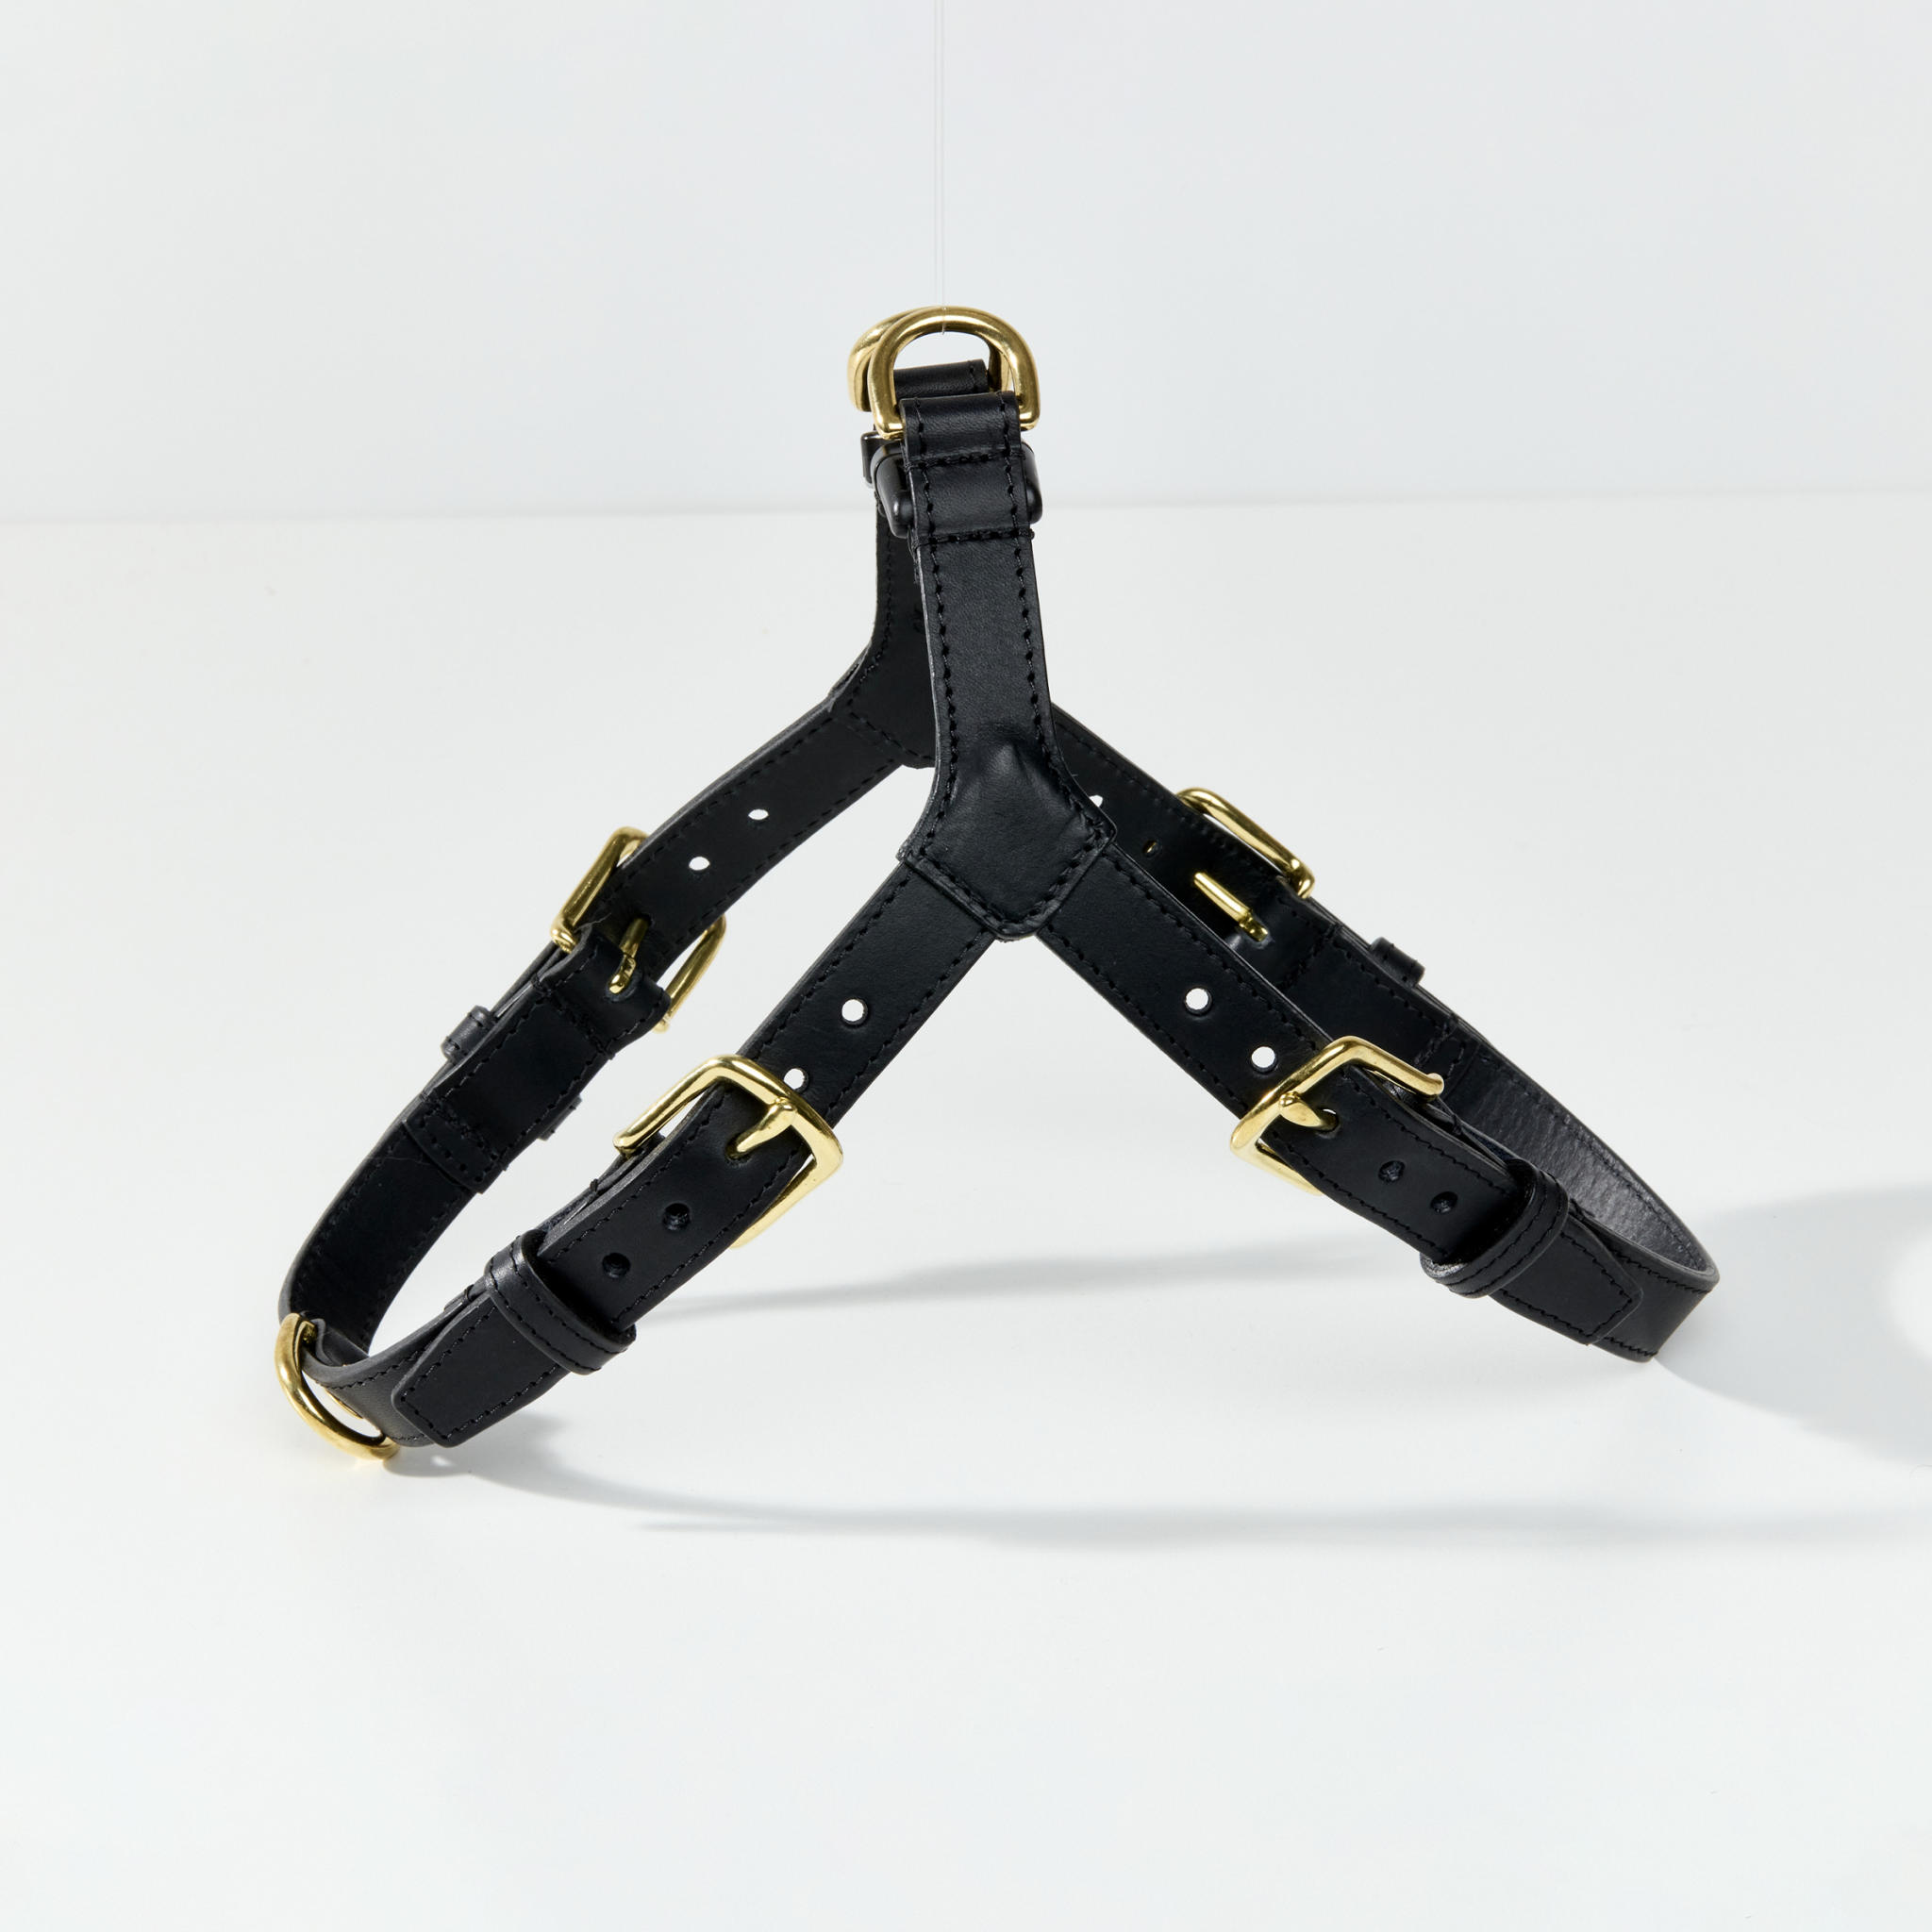 One-click Leather Dog Harness in Black